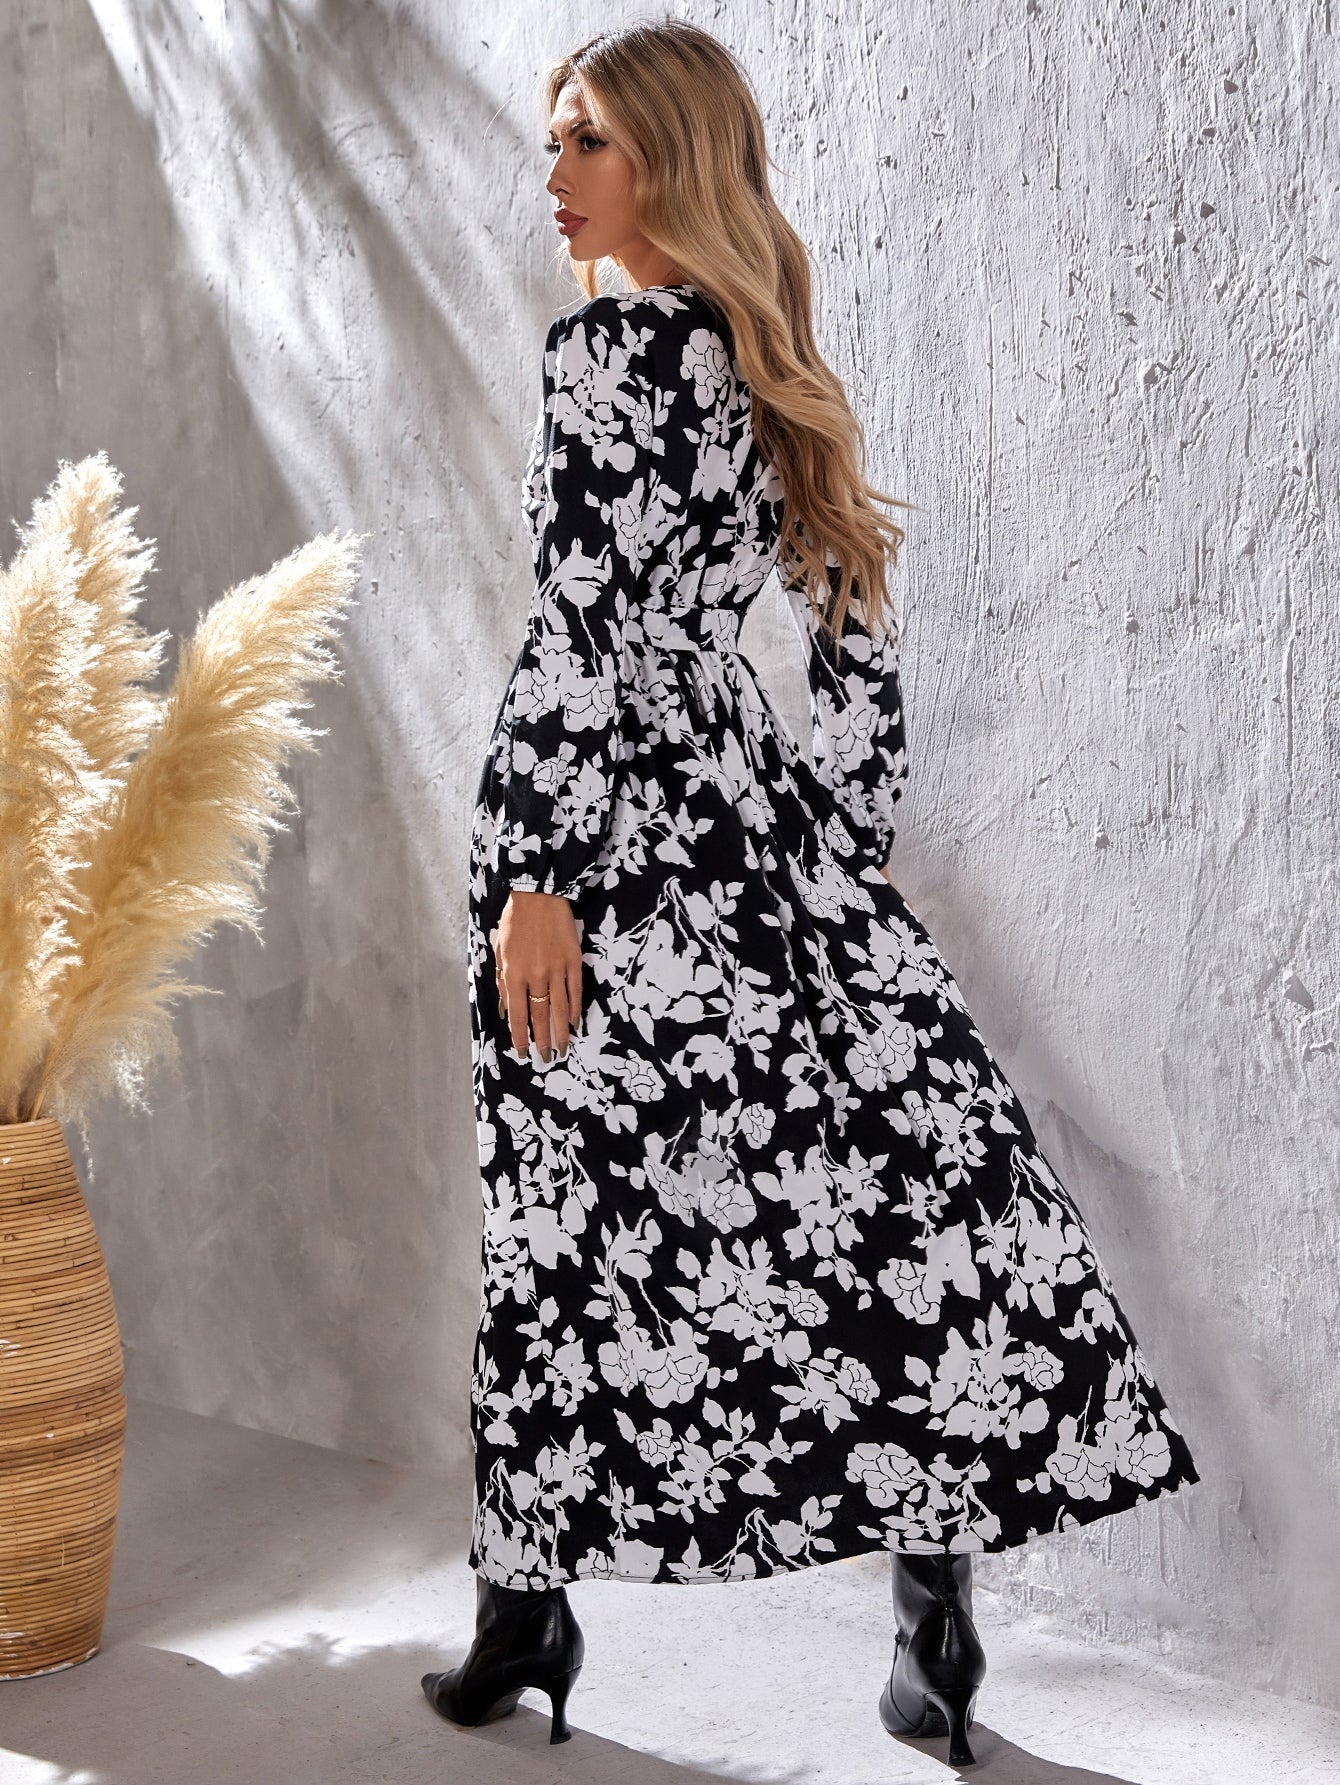 Women's Casual Floral Print Evening Dresses Long Sleeve V Neck Cocktail Party Long Maxi Dress Sai Feel